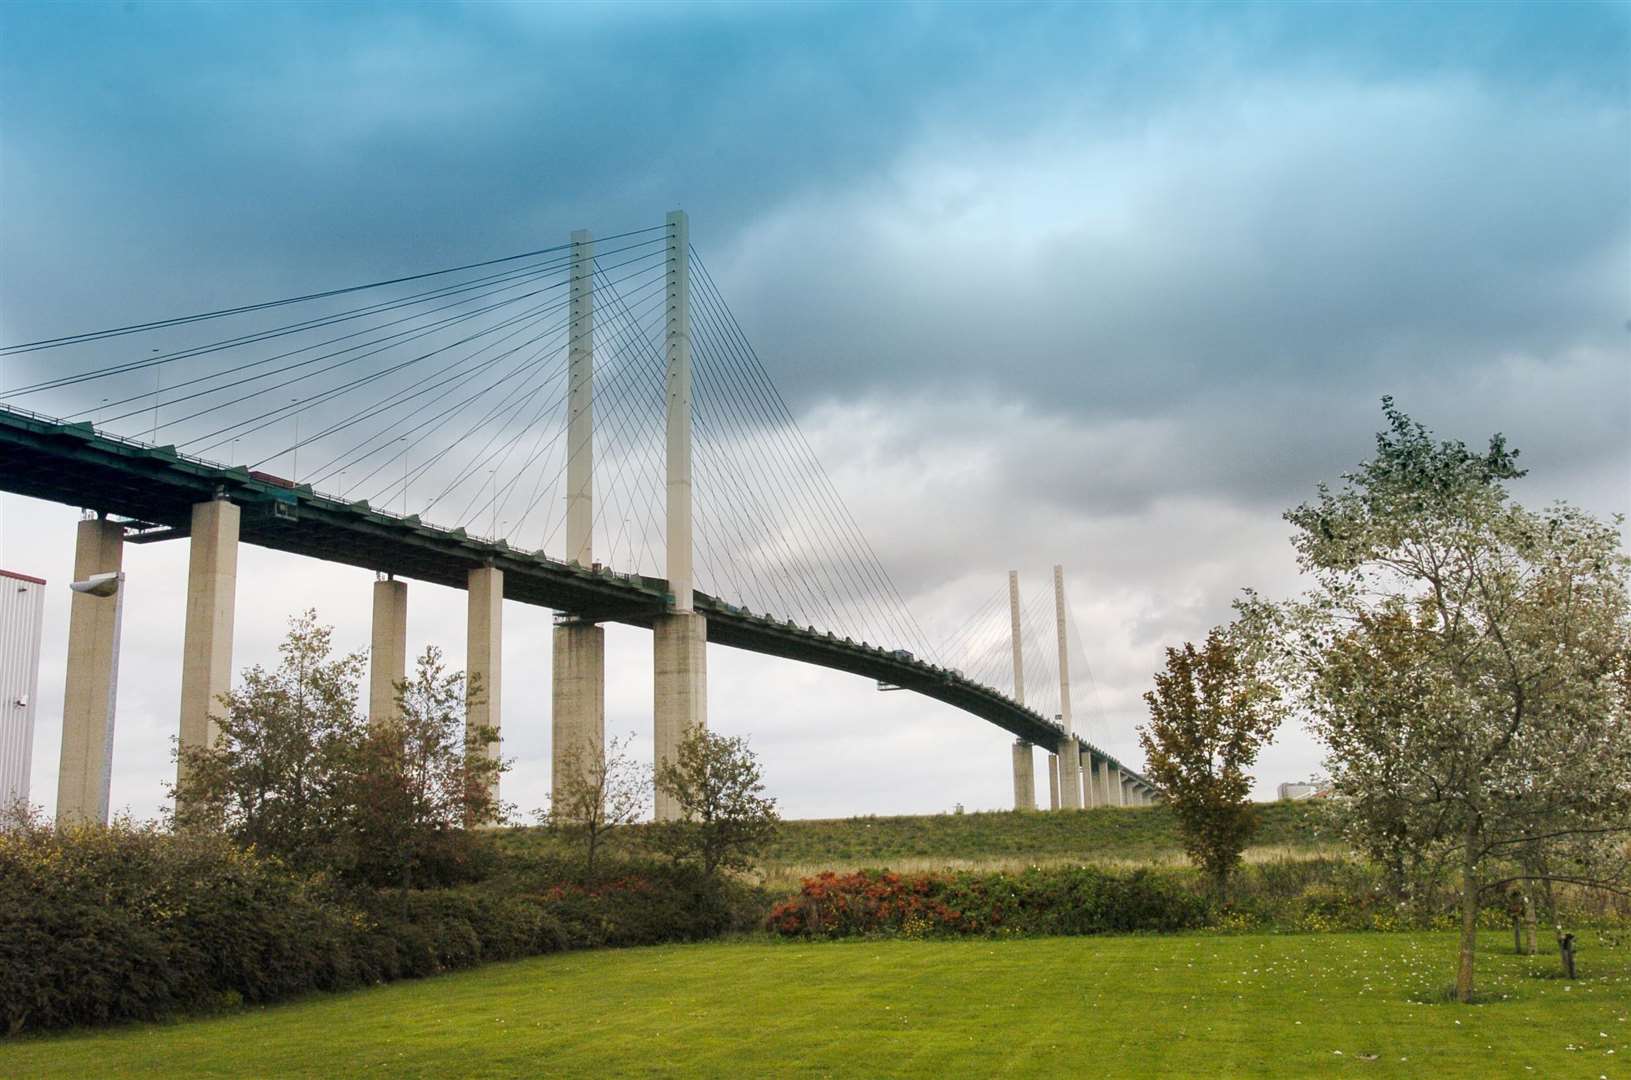 The QEII Bridge spans the Thames at the Dartford Crossing and is regularly checked